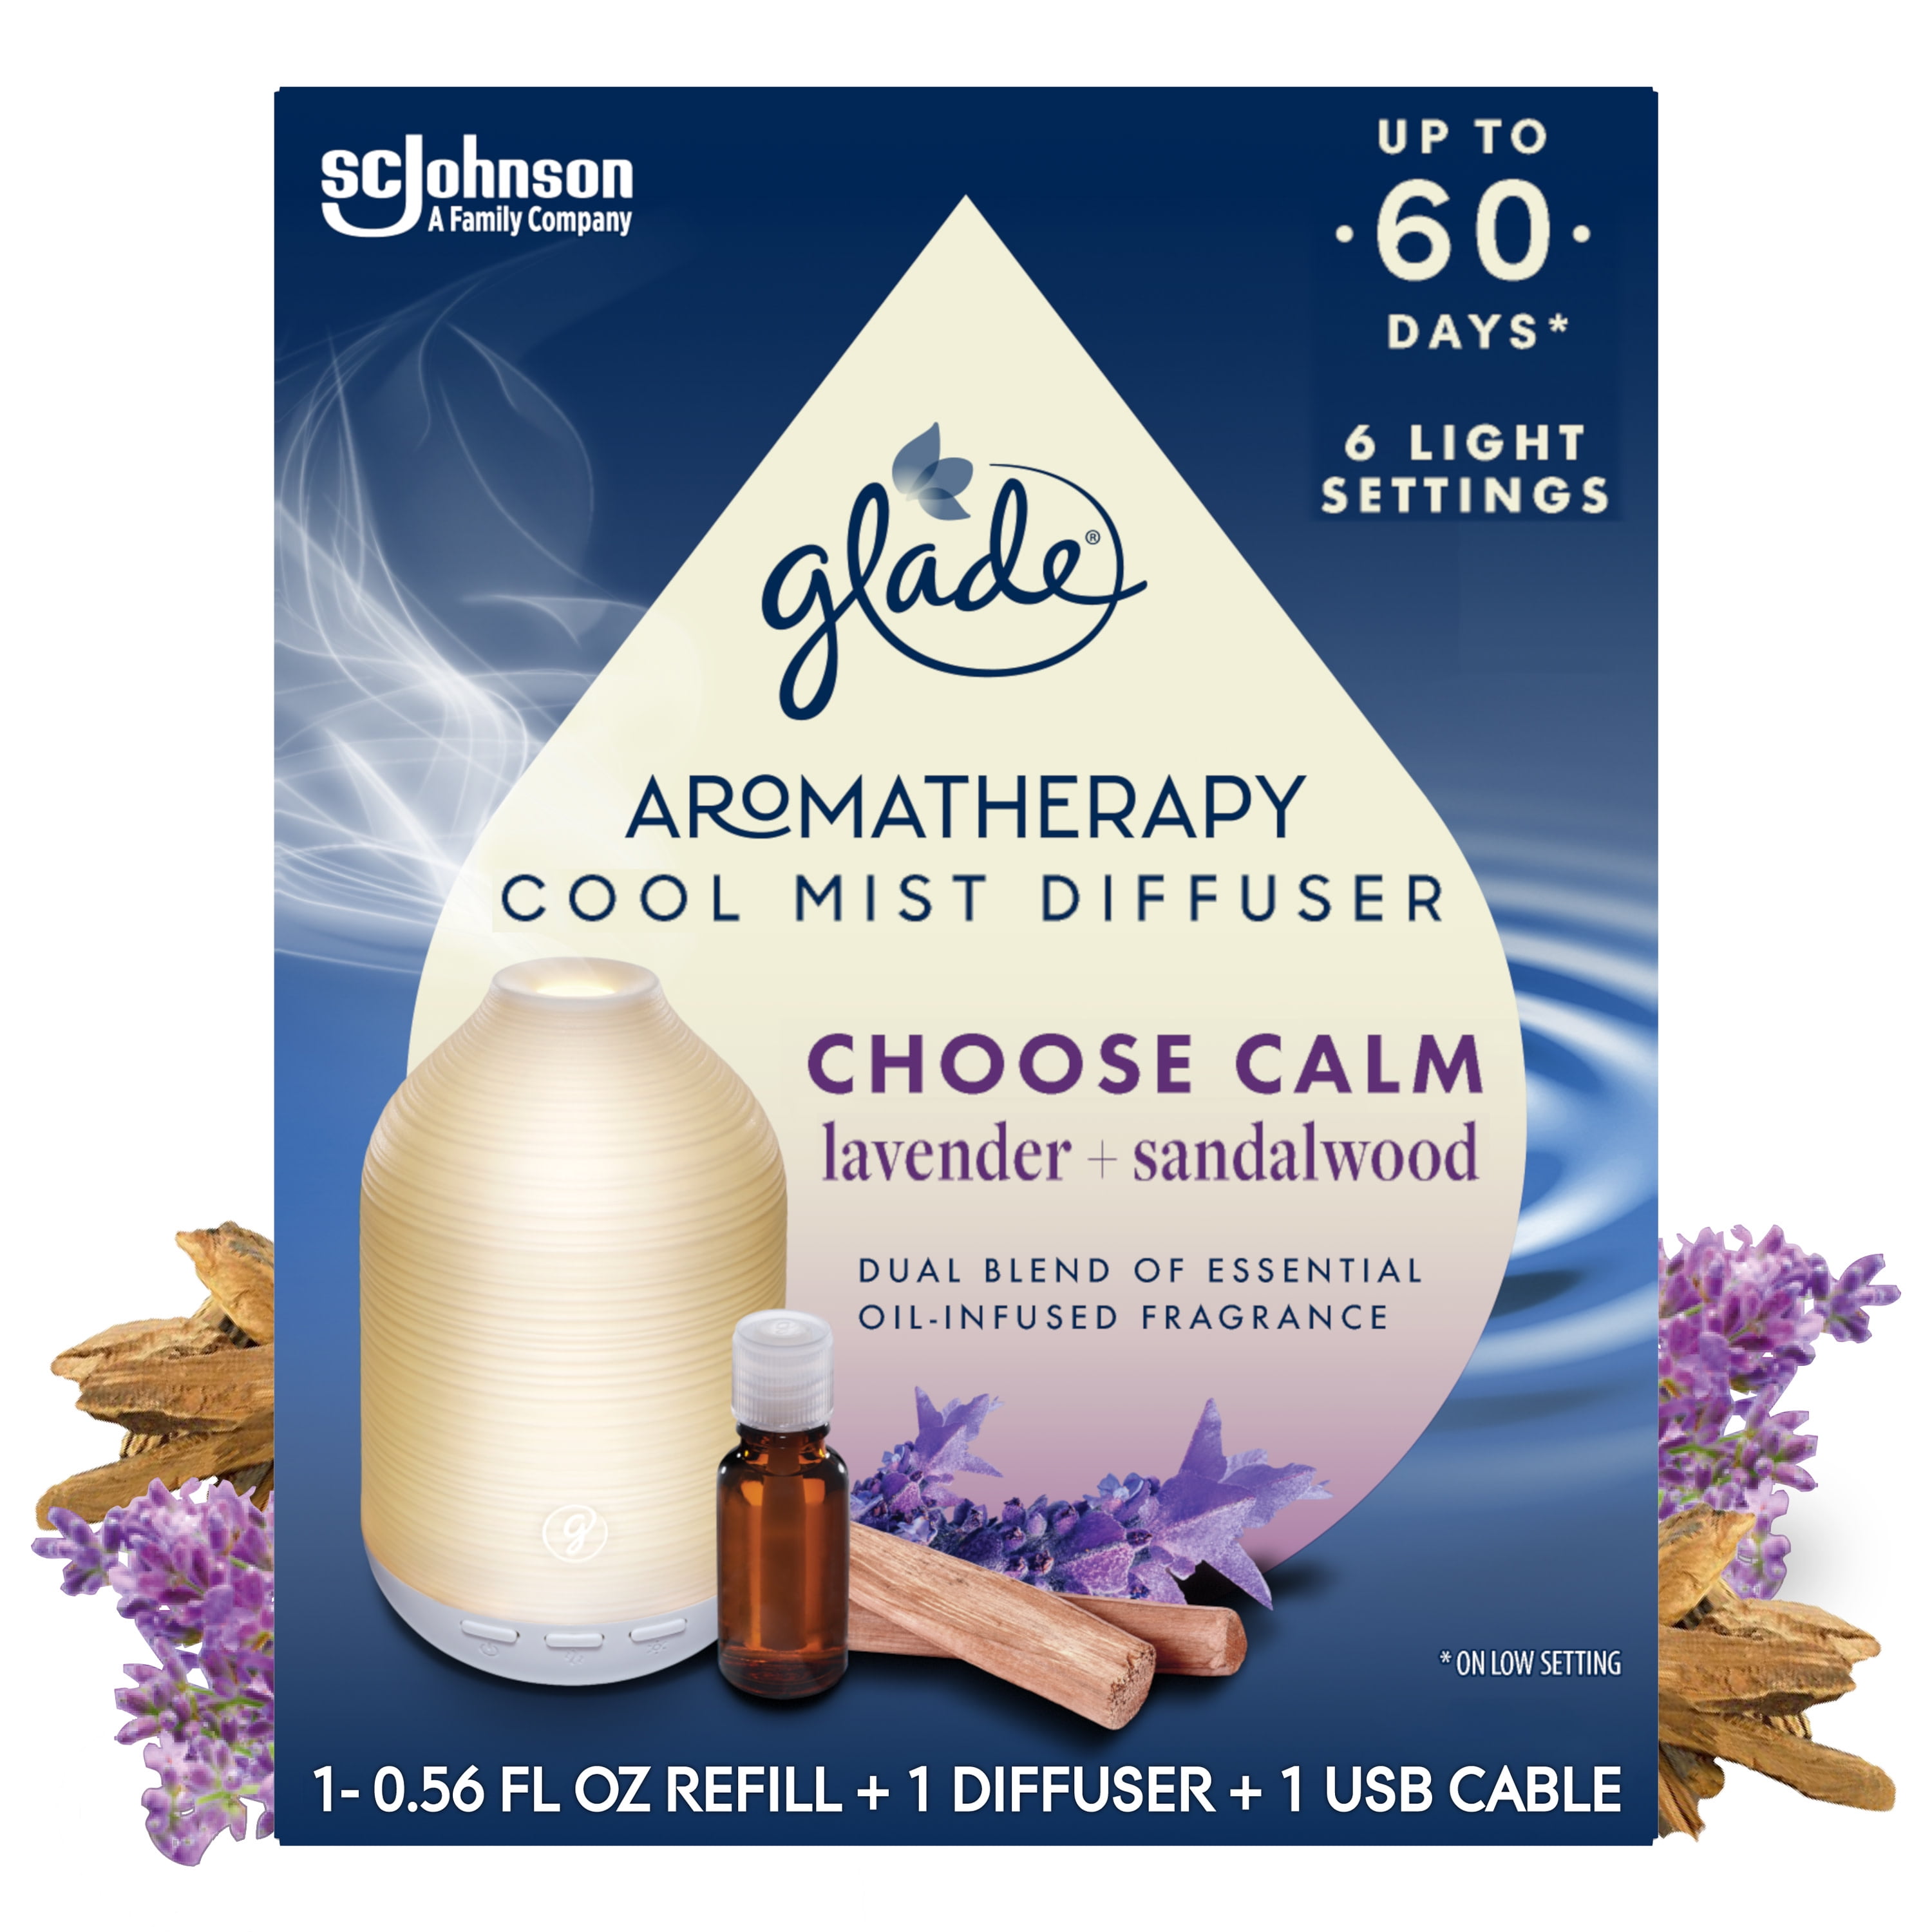 Glade Essential Oil Diffuser, Choose Calm Scentwith Notes of Lavender & Sandalwood, 0.56 oz (16.8 ml), Cool Mist Aromatherapy Diffuser & Air Freshener for Home